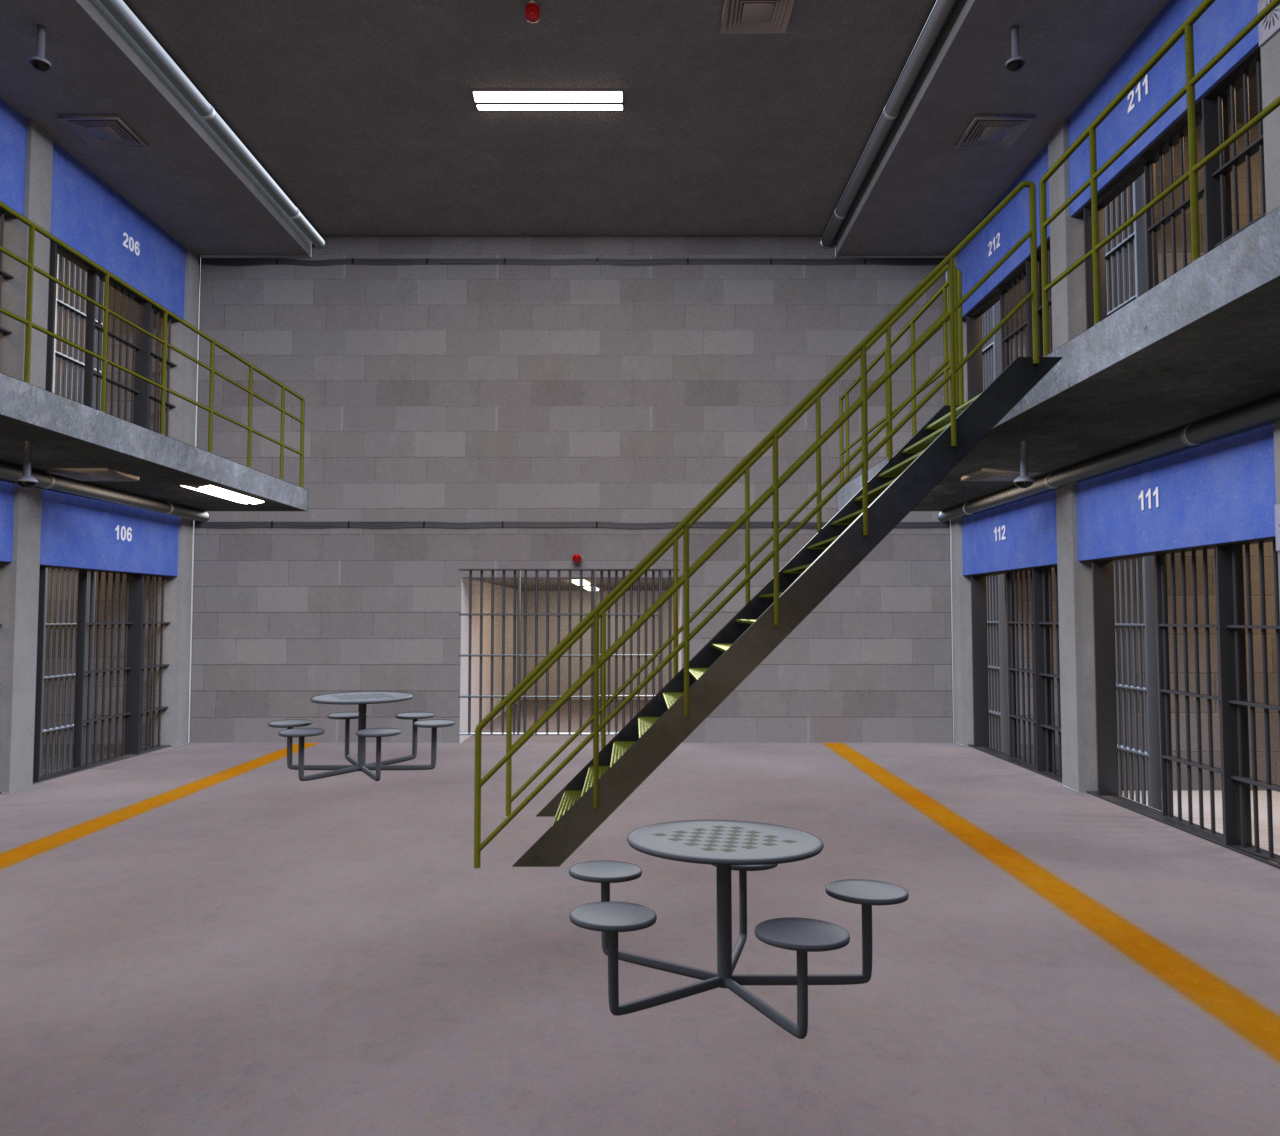 INT. CELL BLOCK COMMON AREA 1 – DAY